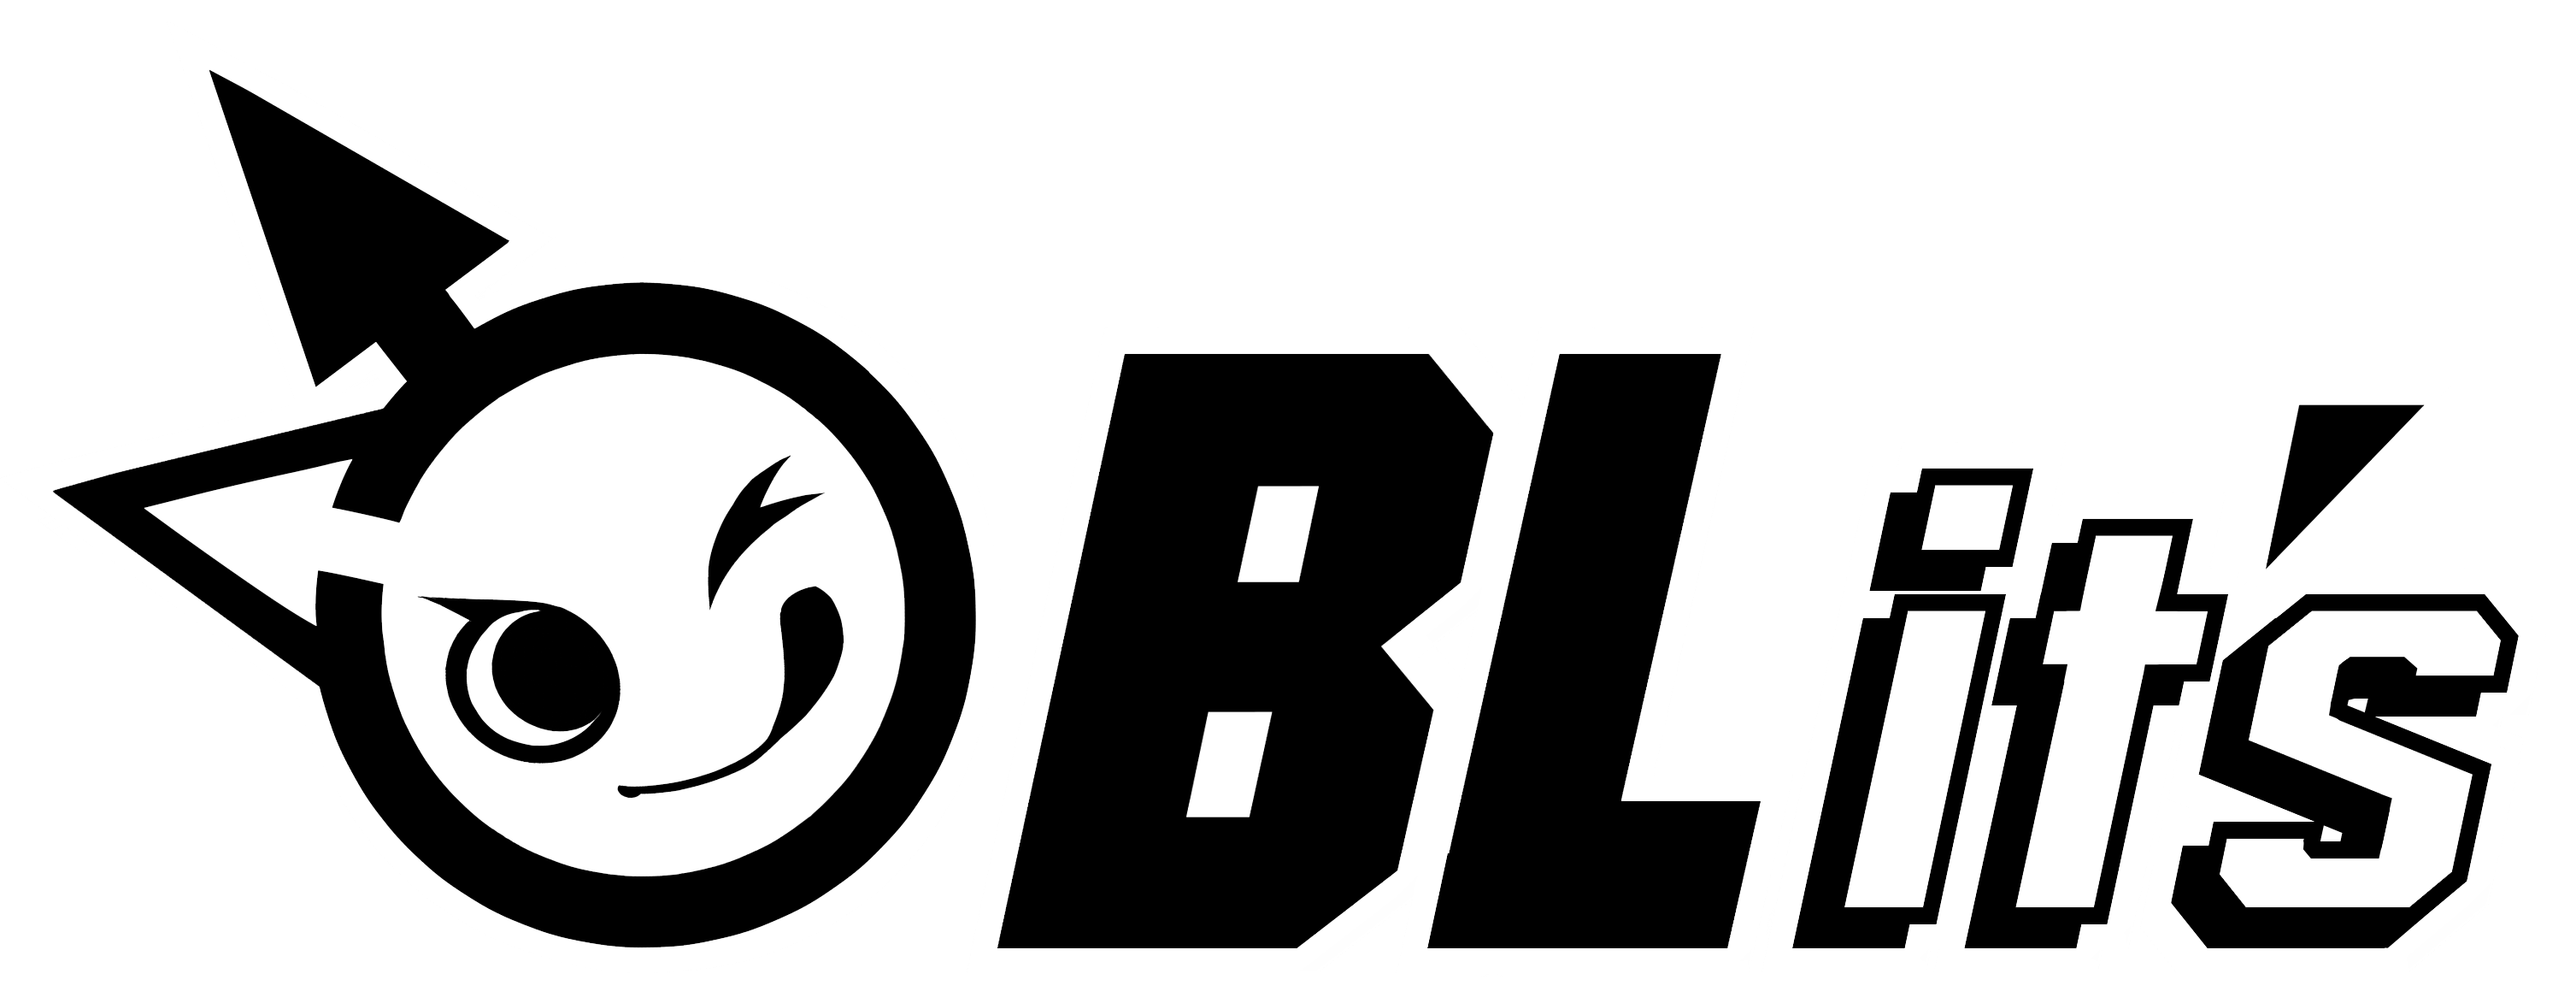 BLits-Logo-with-face.png